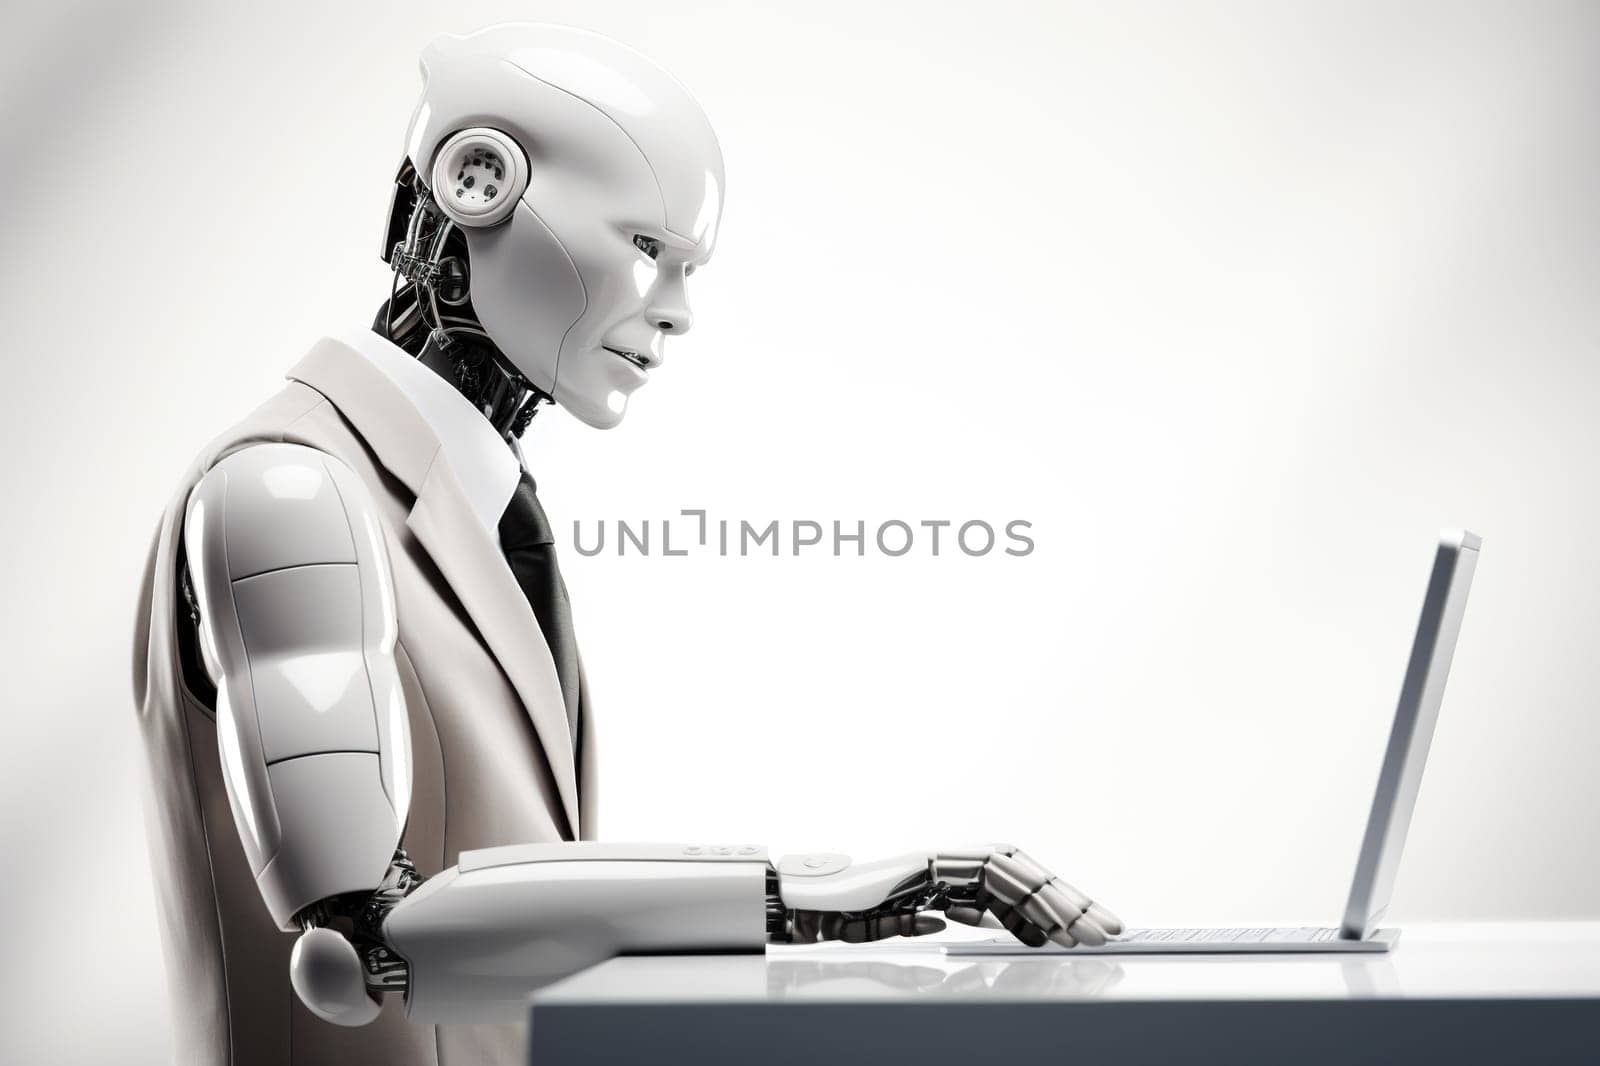 A humanoid robot works on a laptop. White robot on a white background with space for text.